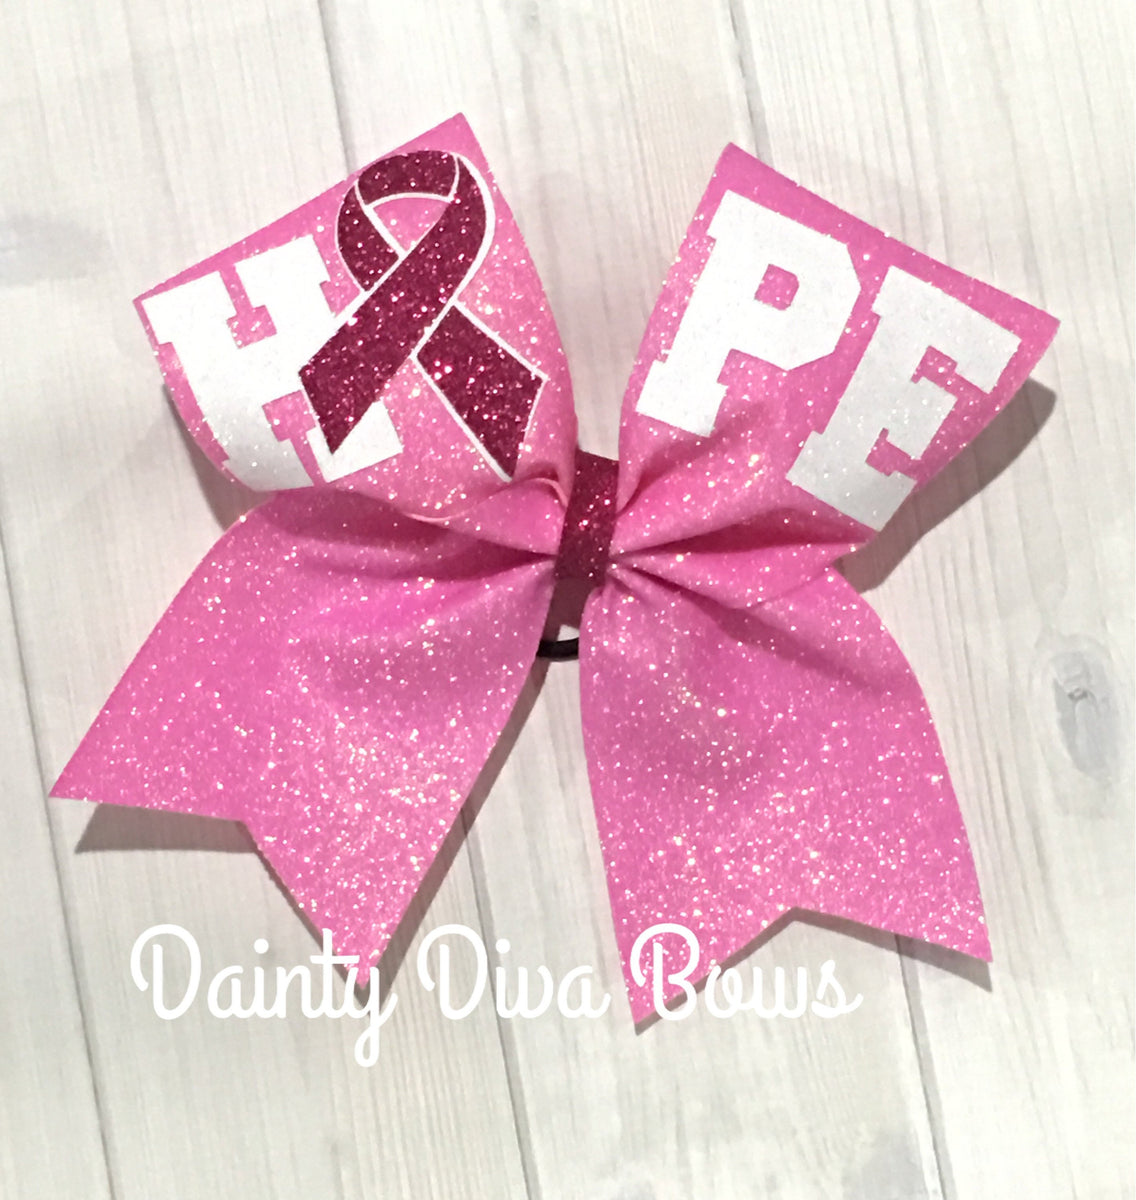 3 Custom Cheer Bows Made in Your Team Colors. Rhinestone Glitter Bow,  Half-floppy Half Stiff Bow and Breast Cancer Bow. Bow Packages 